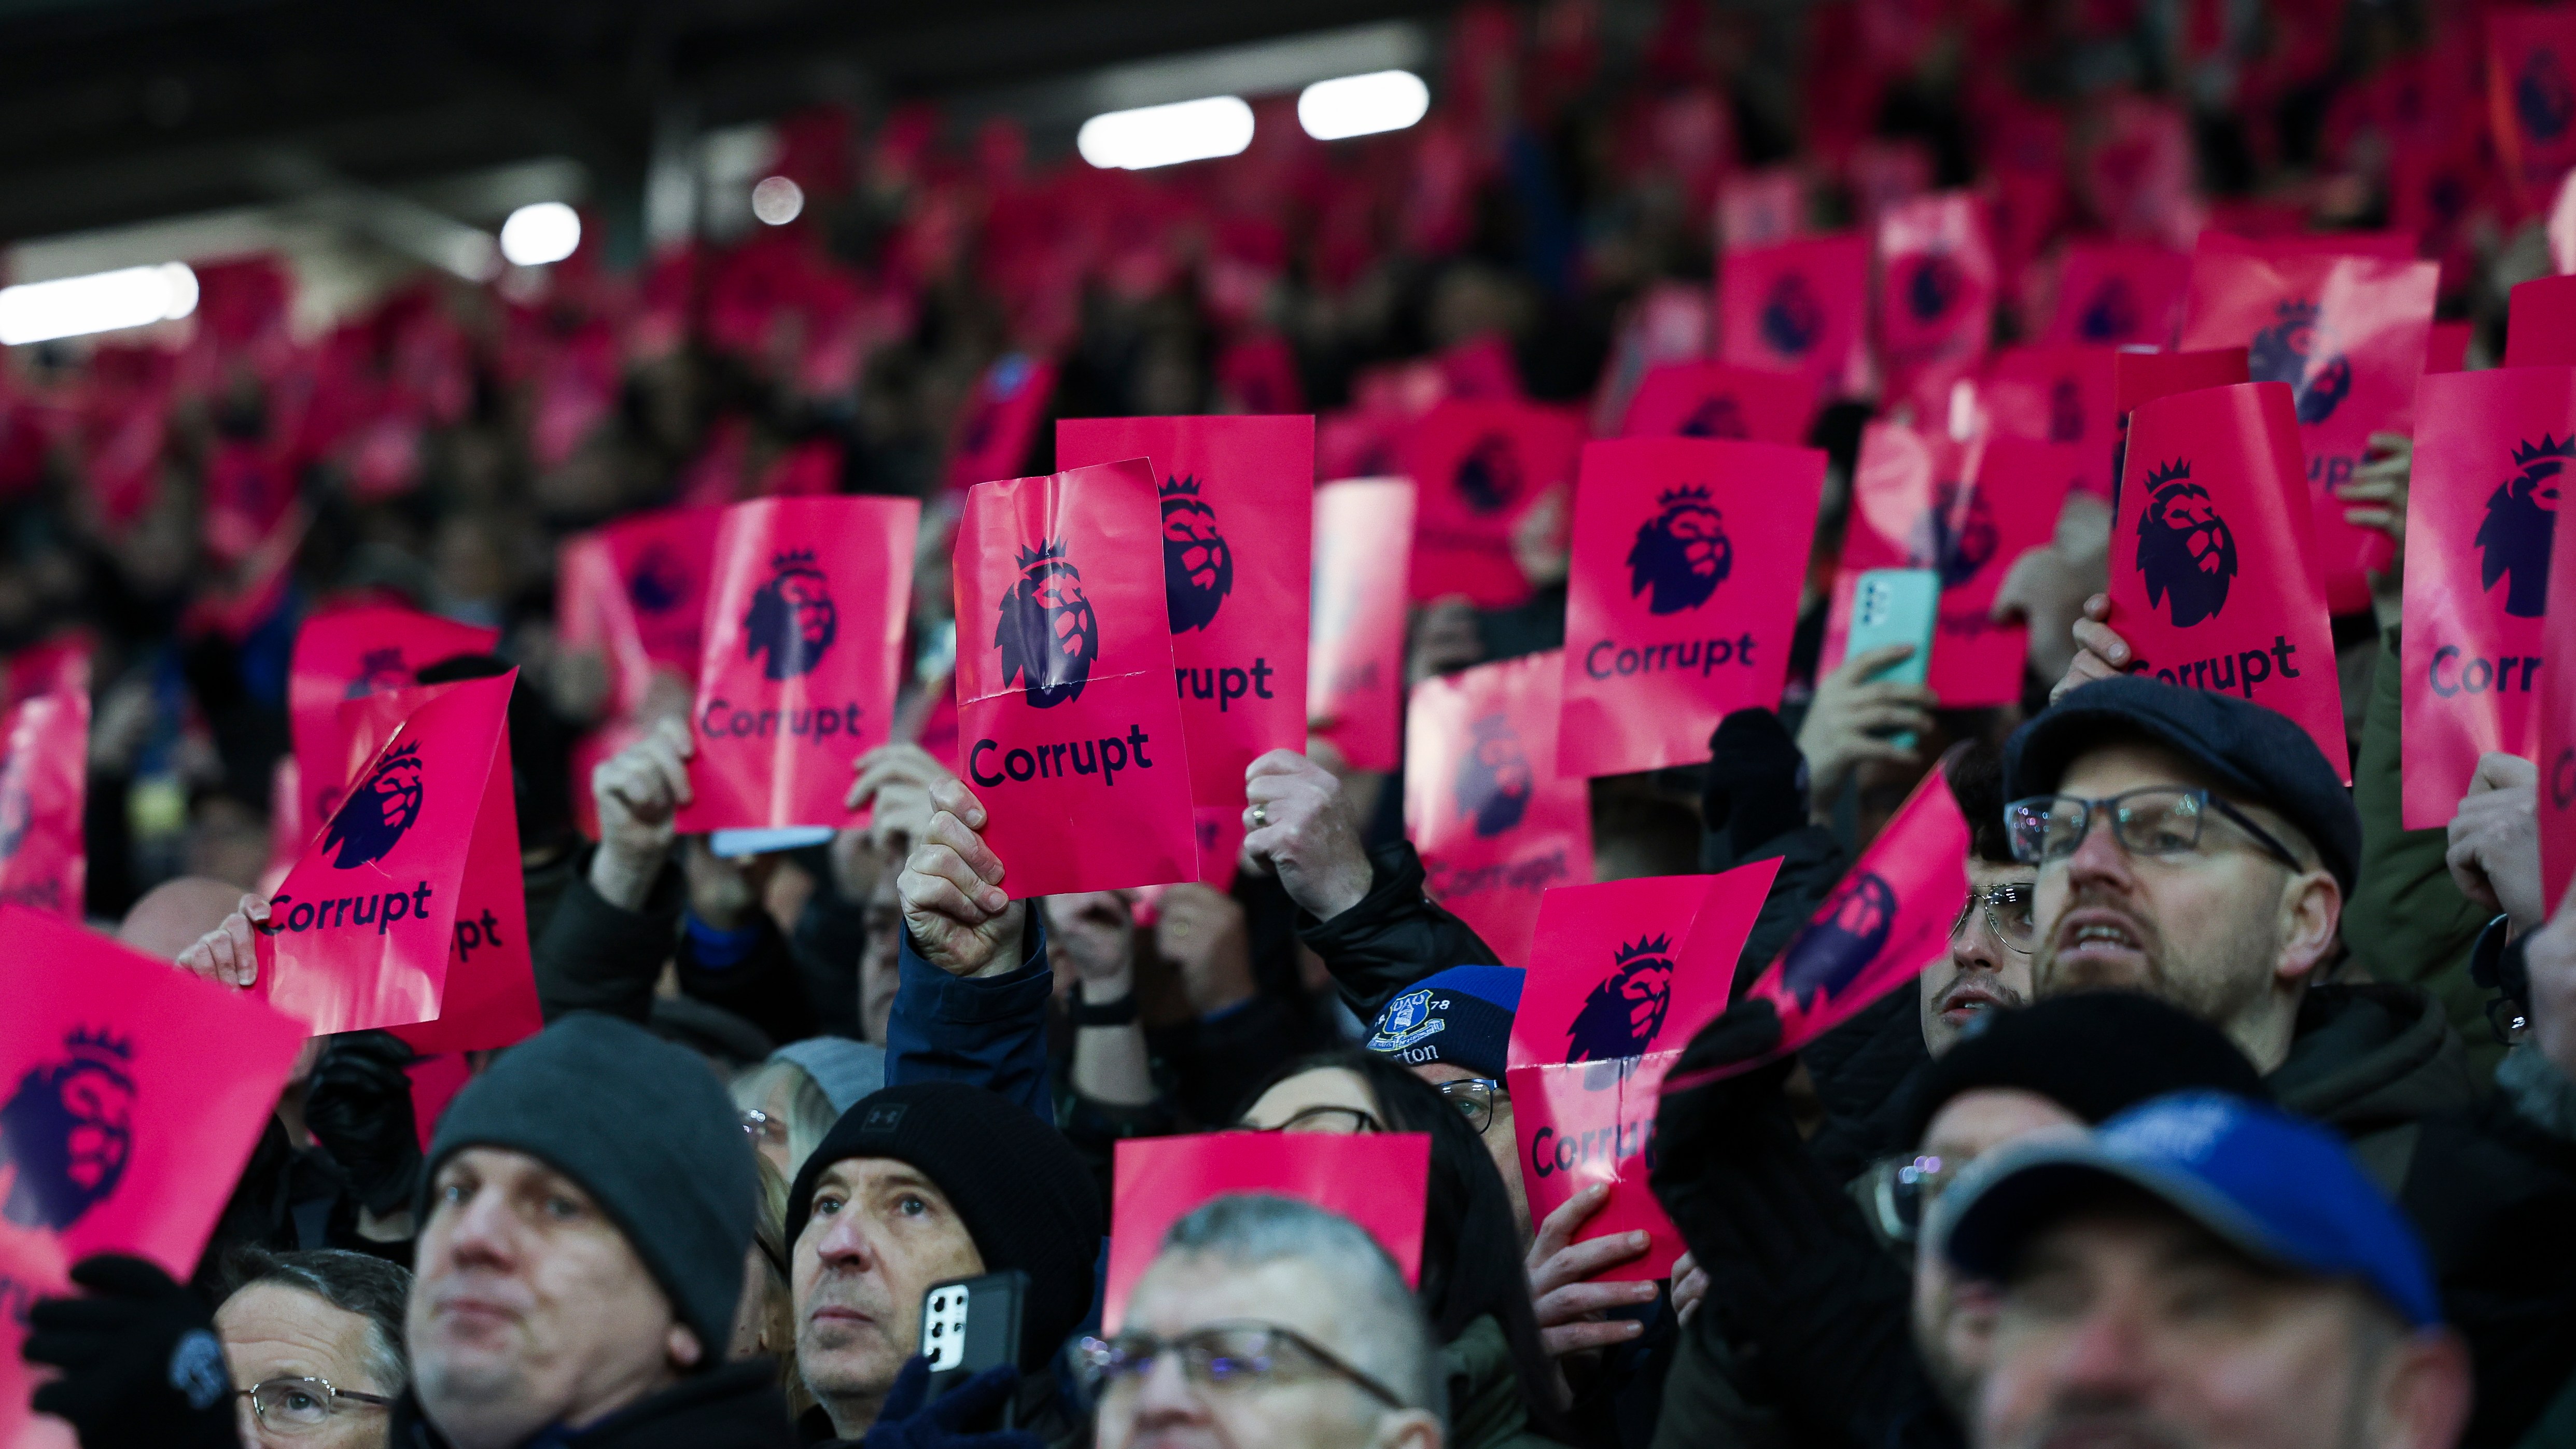 Not so FAB – how Premier League clubs are wrestling with fan boards